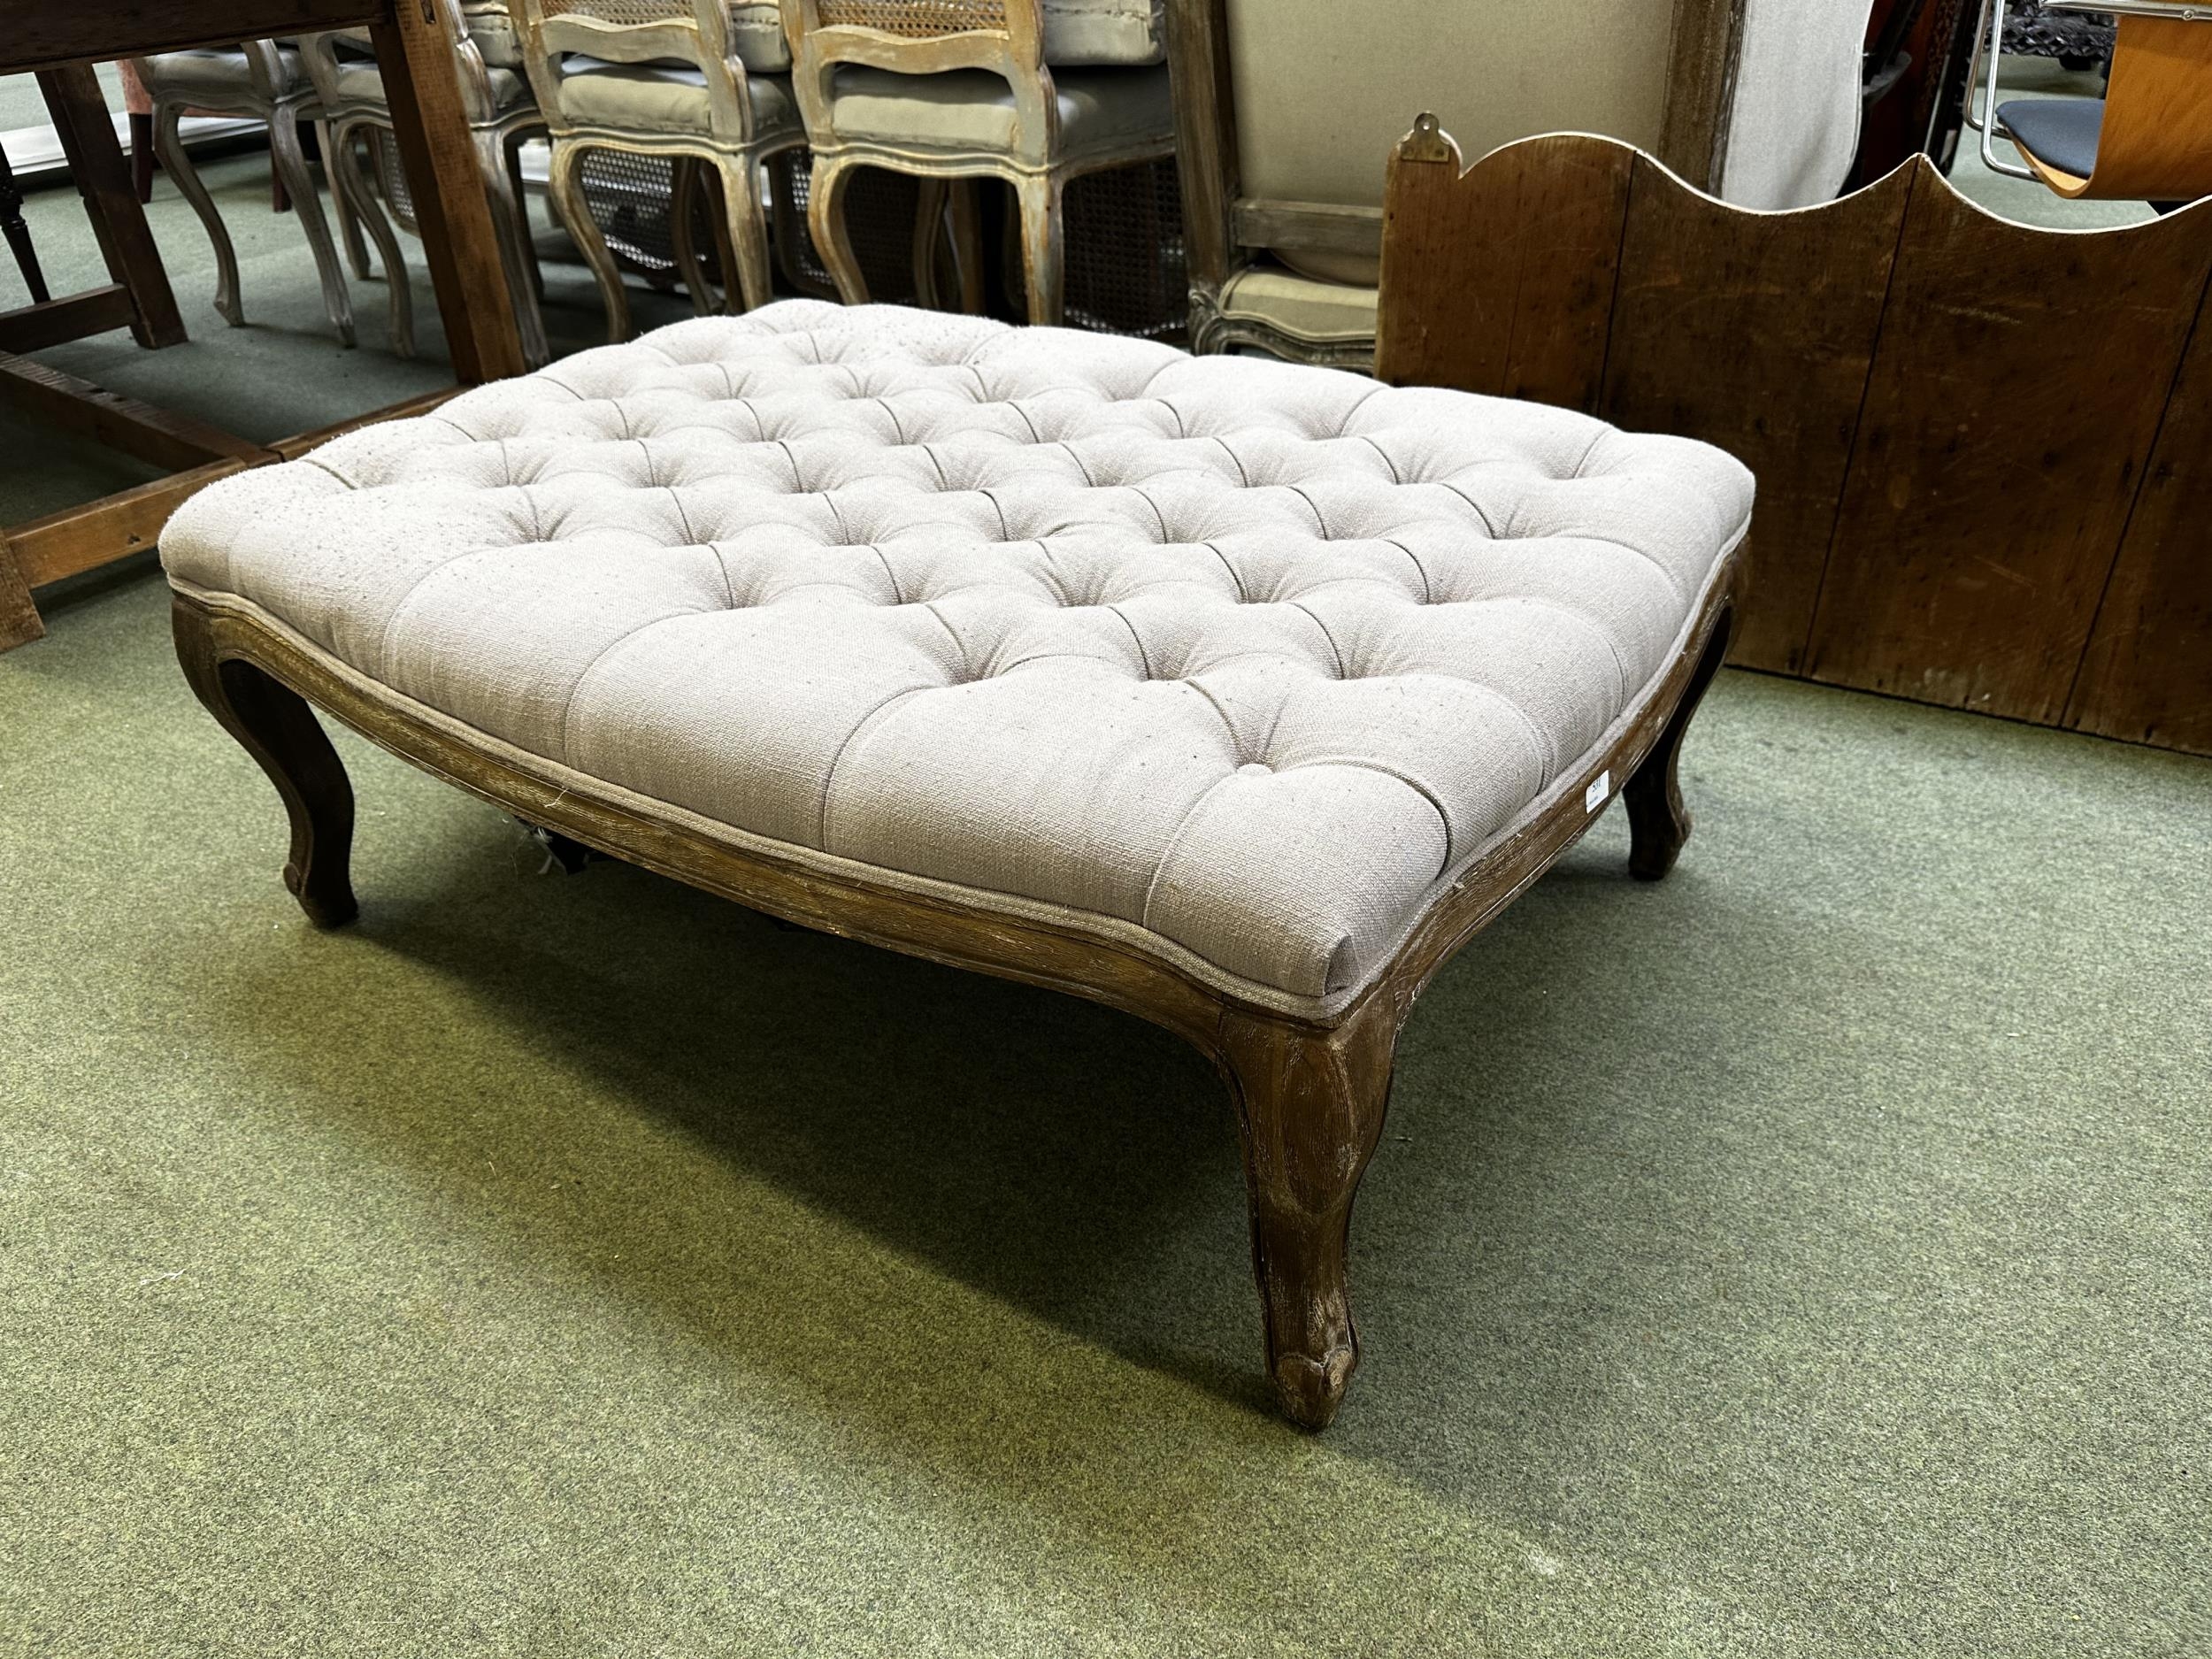 A modern Oka style foot stool with buttoned upholstery, 105 x 74cm - Image 2 of 4